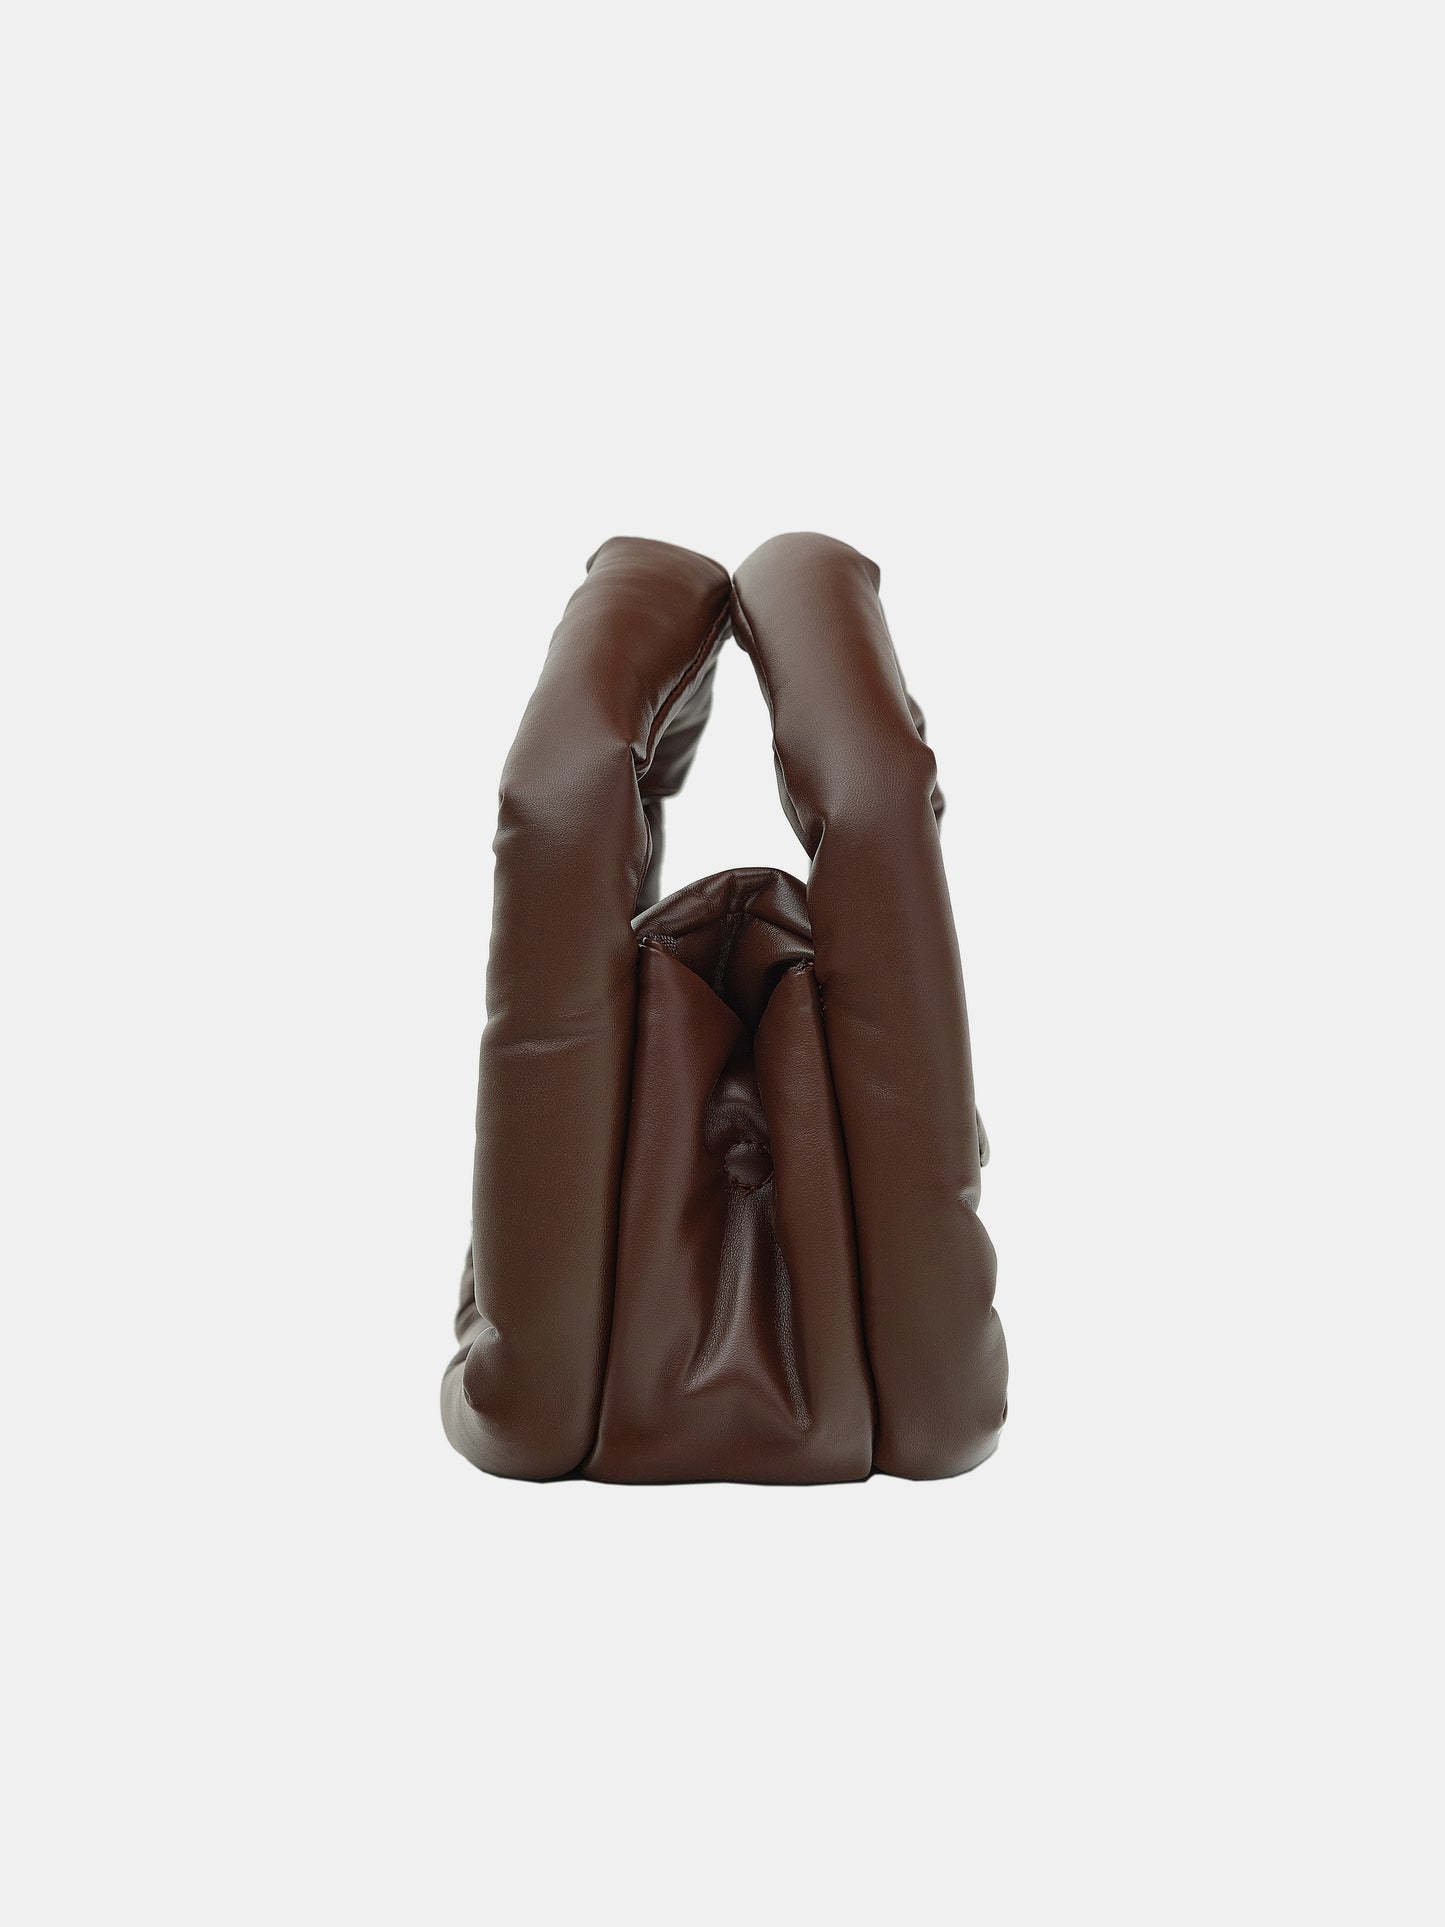 Padded Tote Bag, Chocolate – SourceUnknown